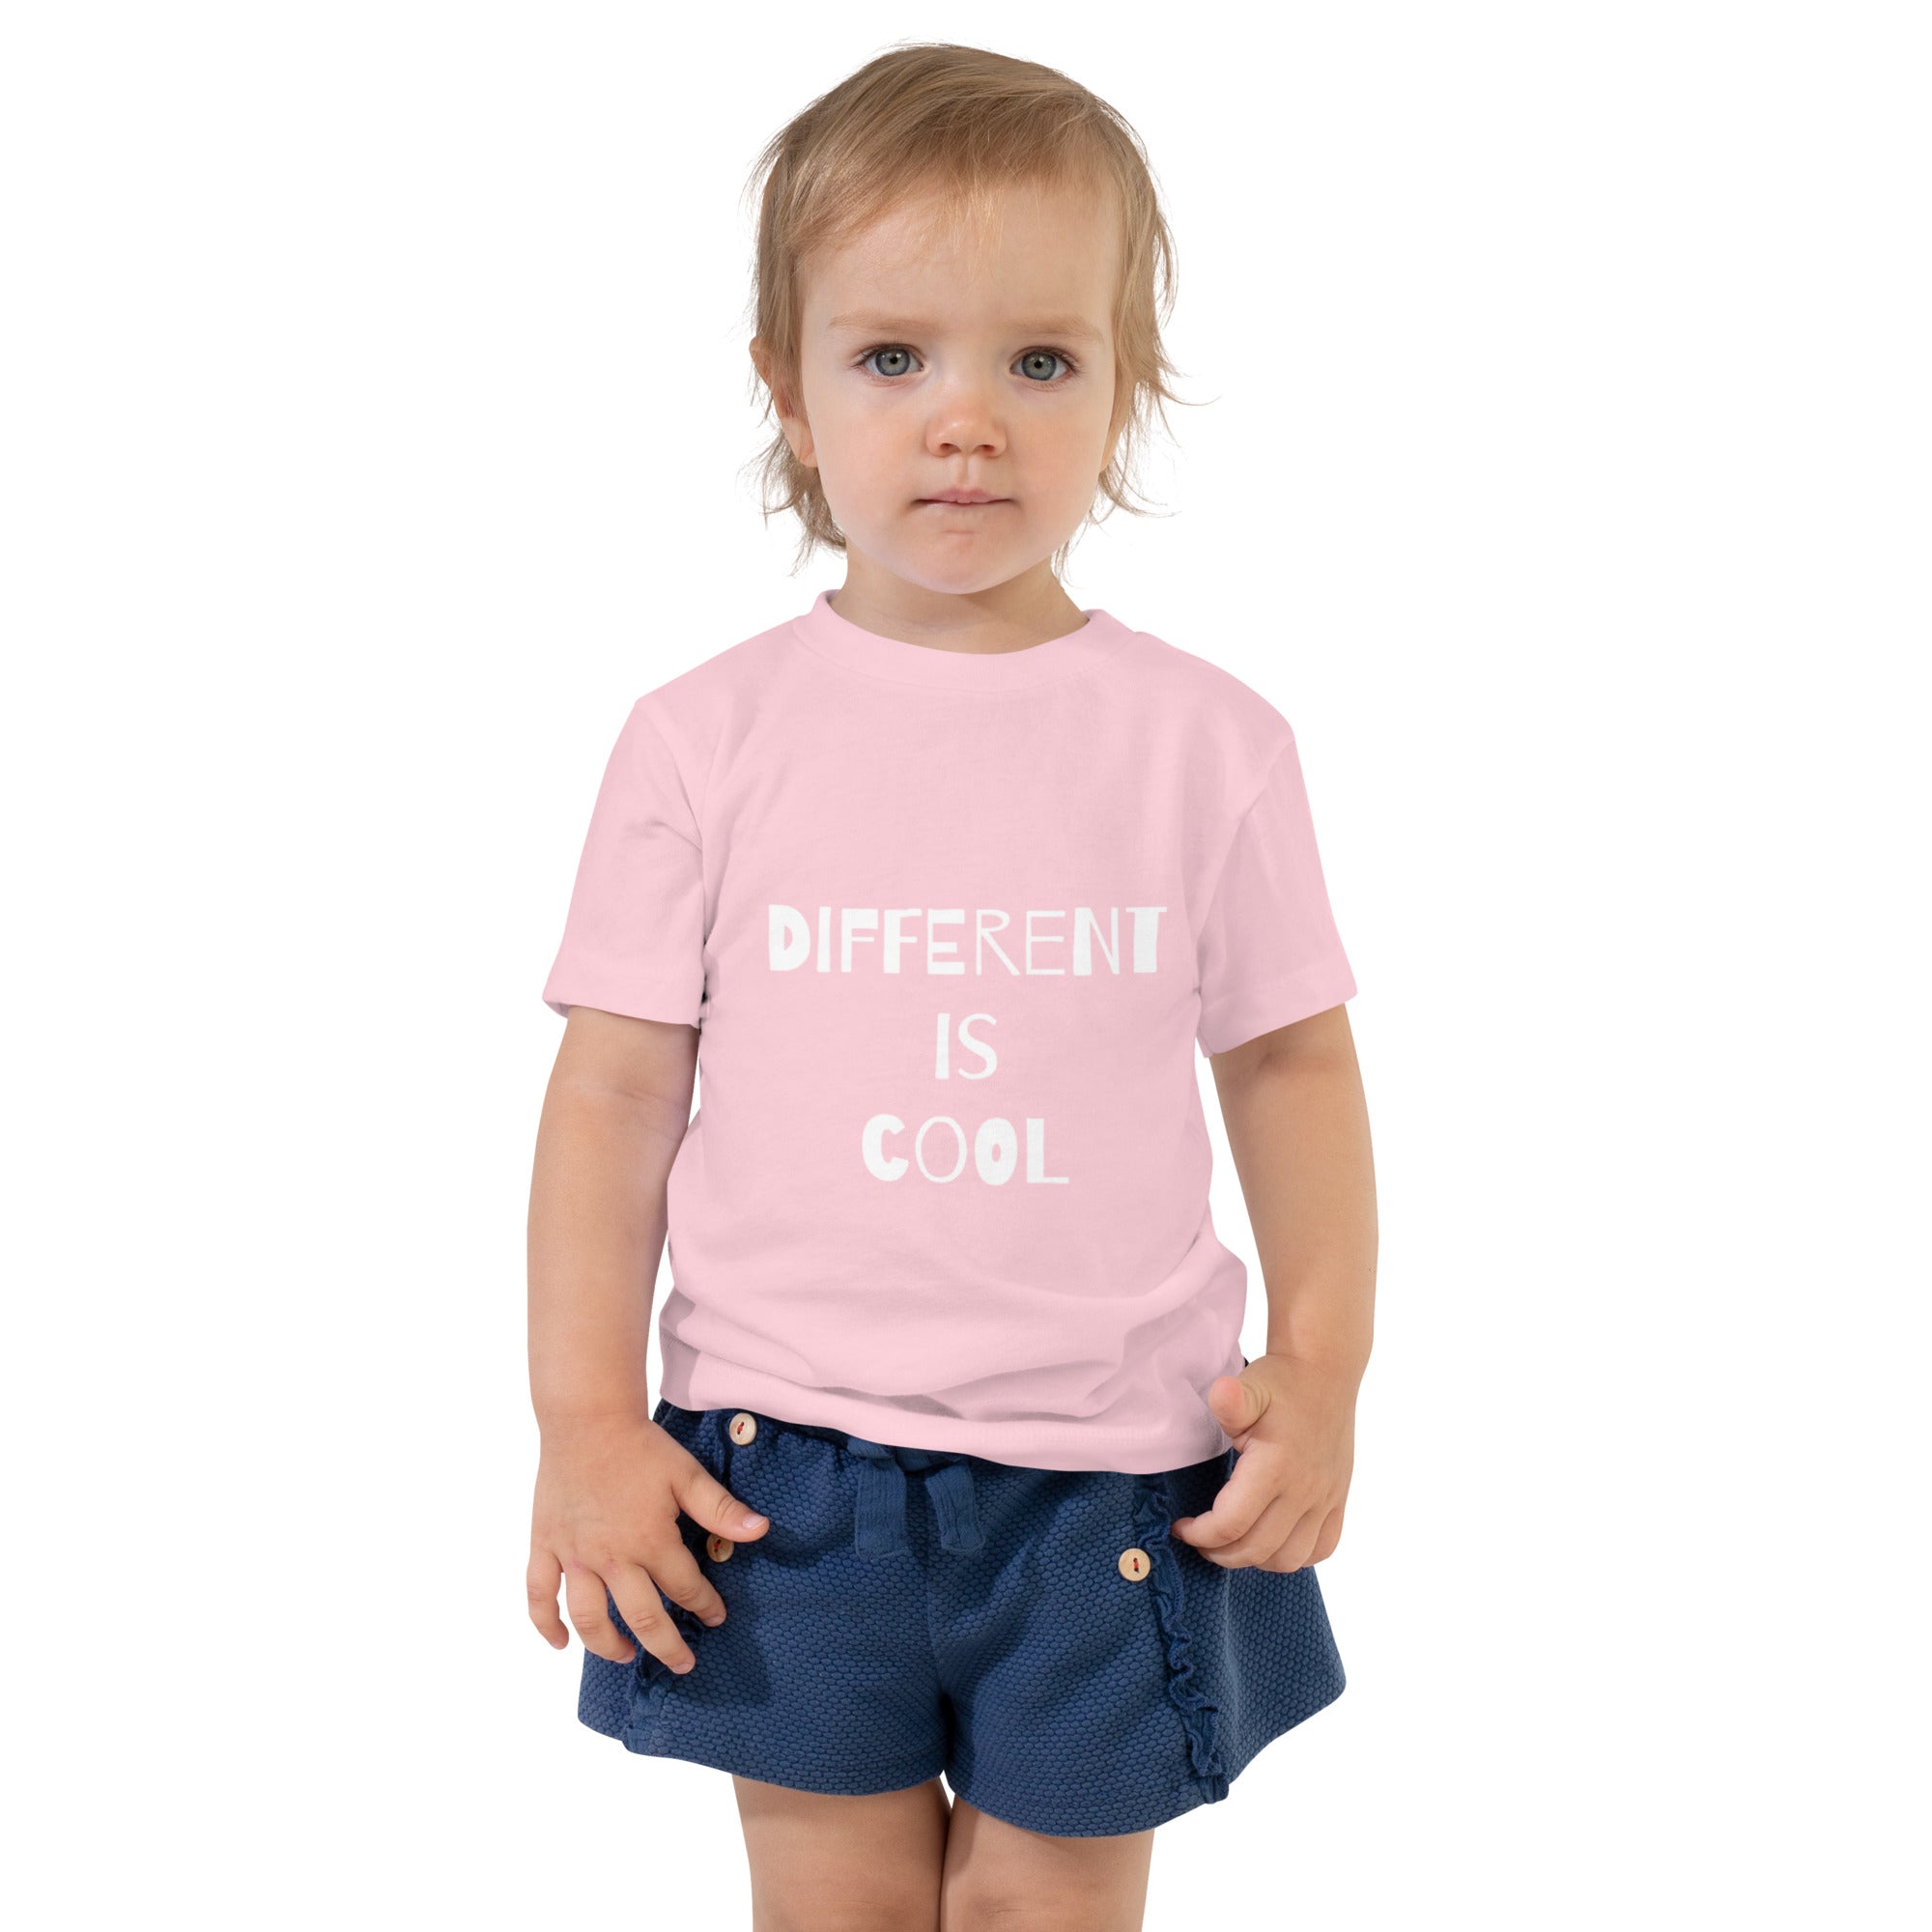 Toddler T-shirt - Different is Cool